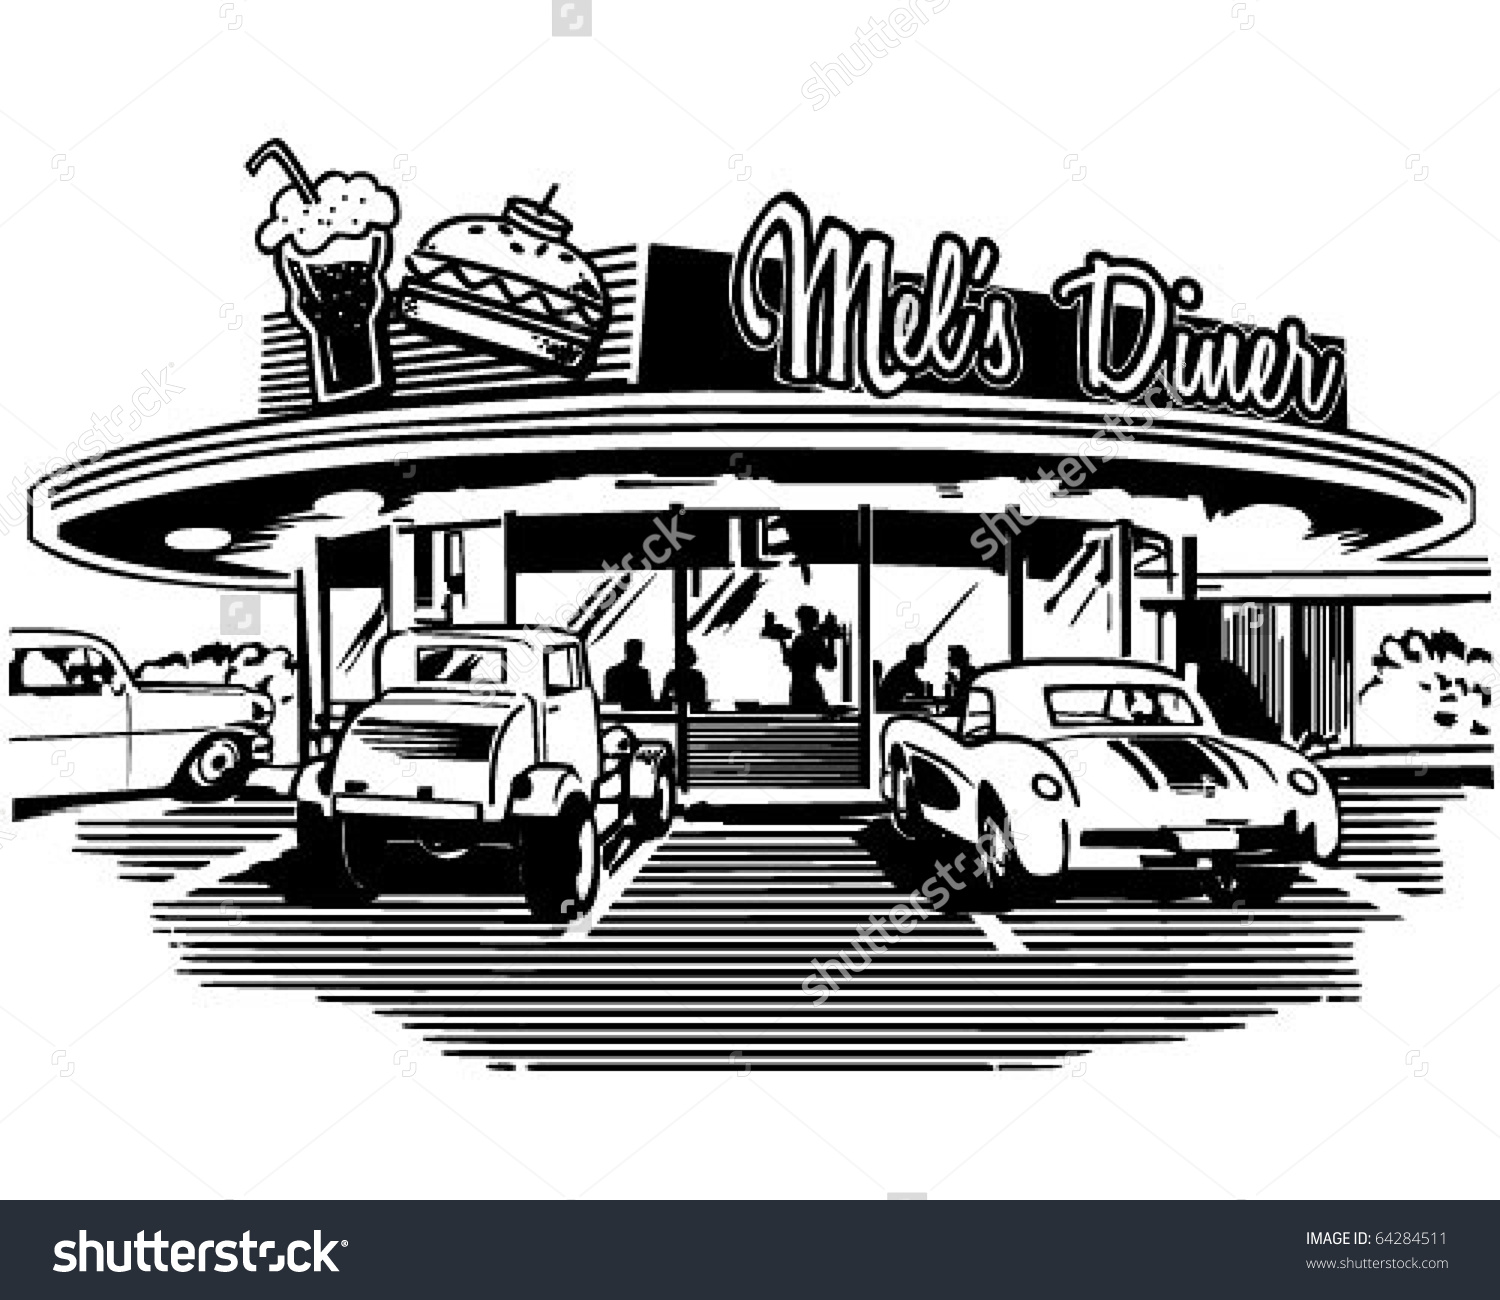 diner clipart drive in diner